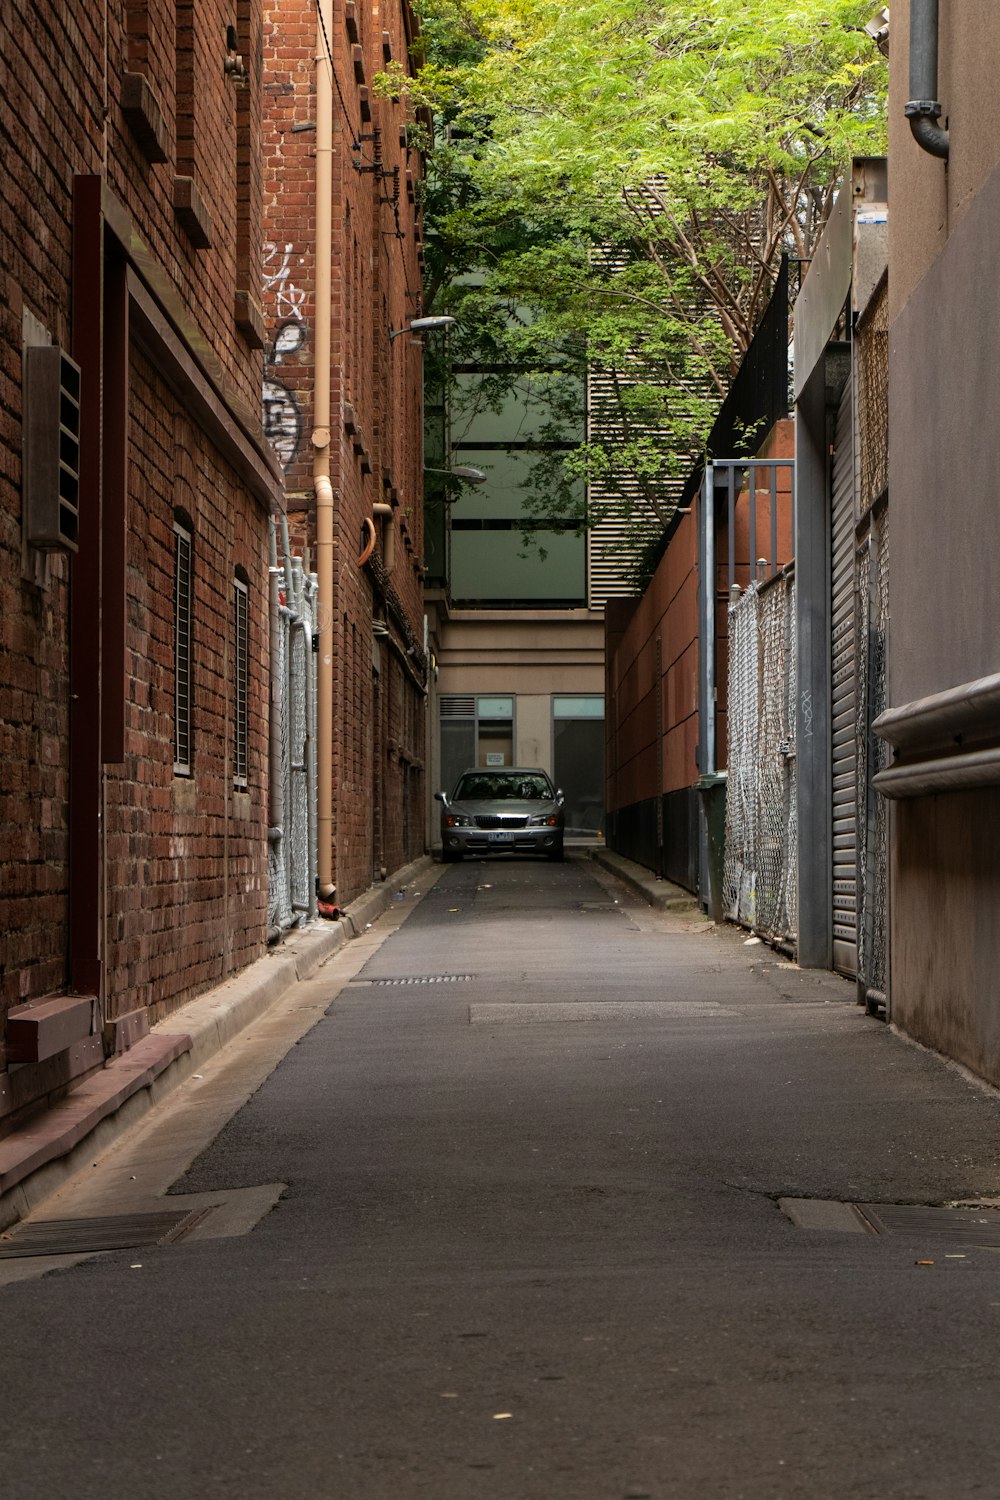 shallow focus photo of gray car parked on alley